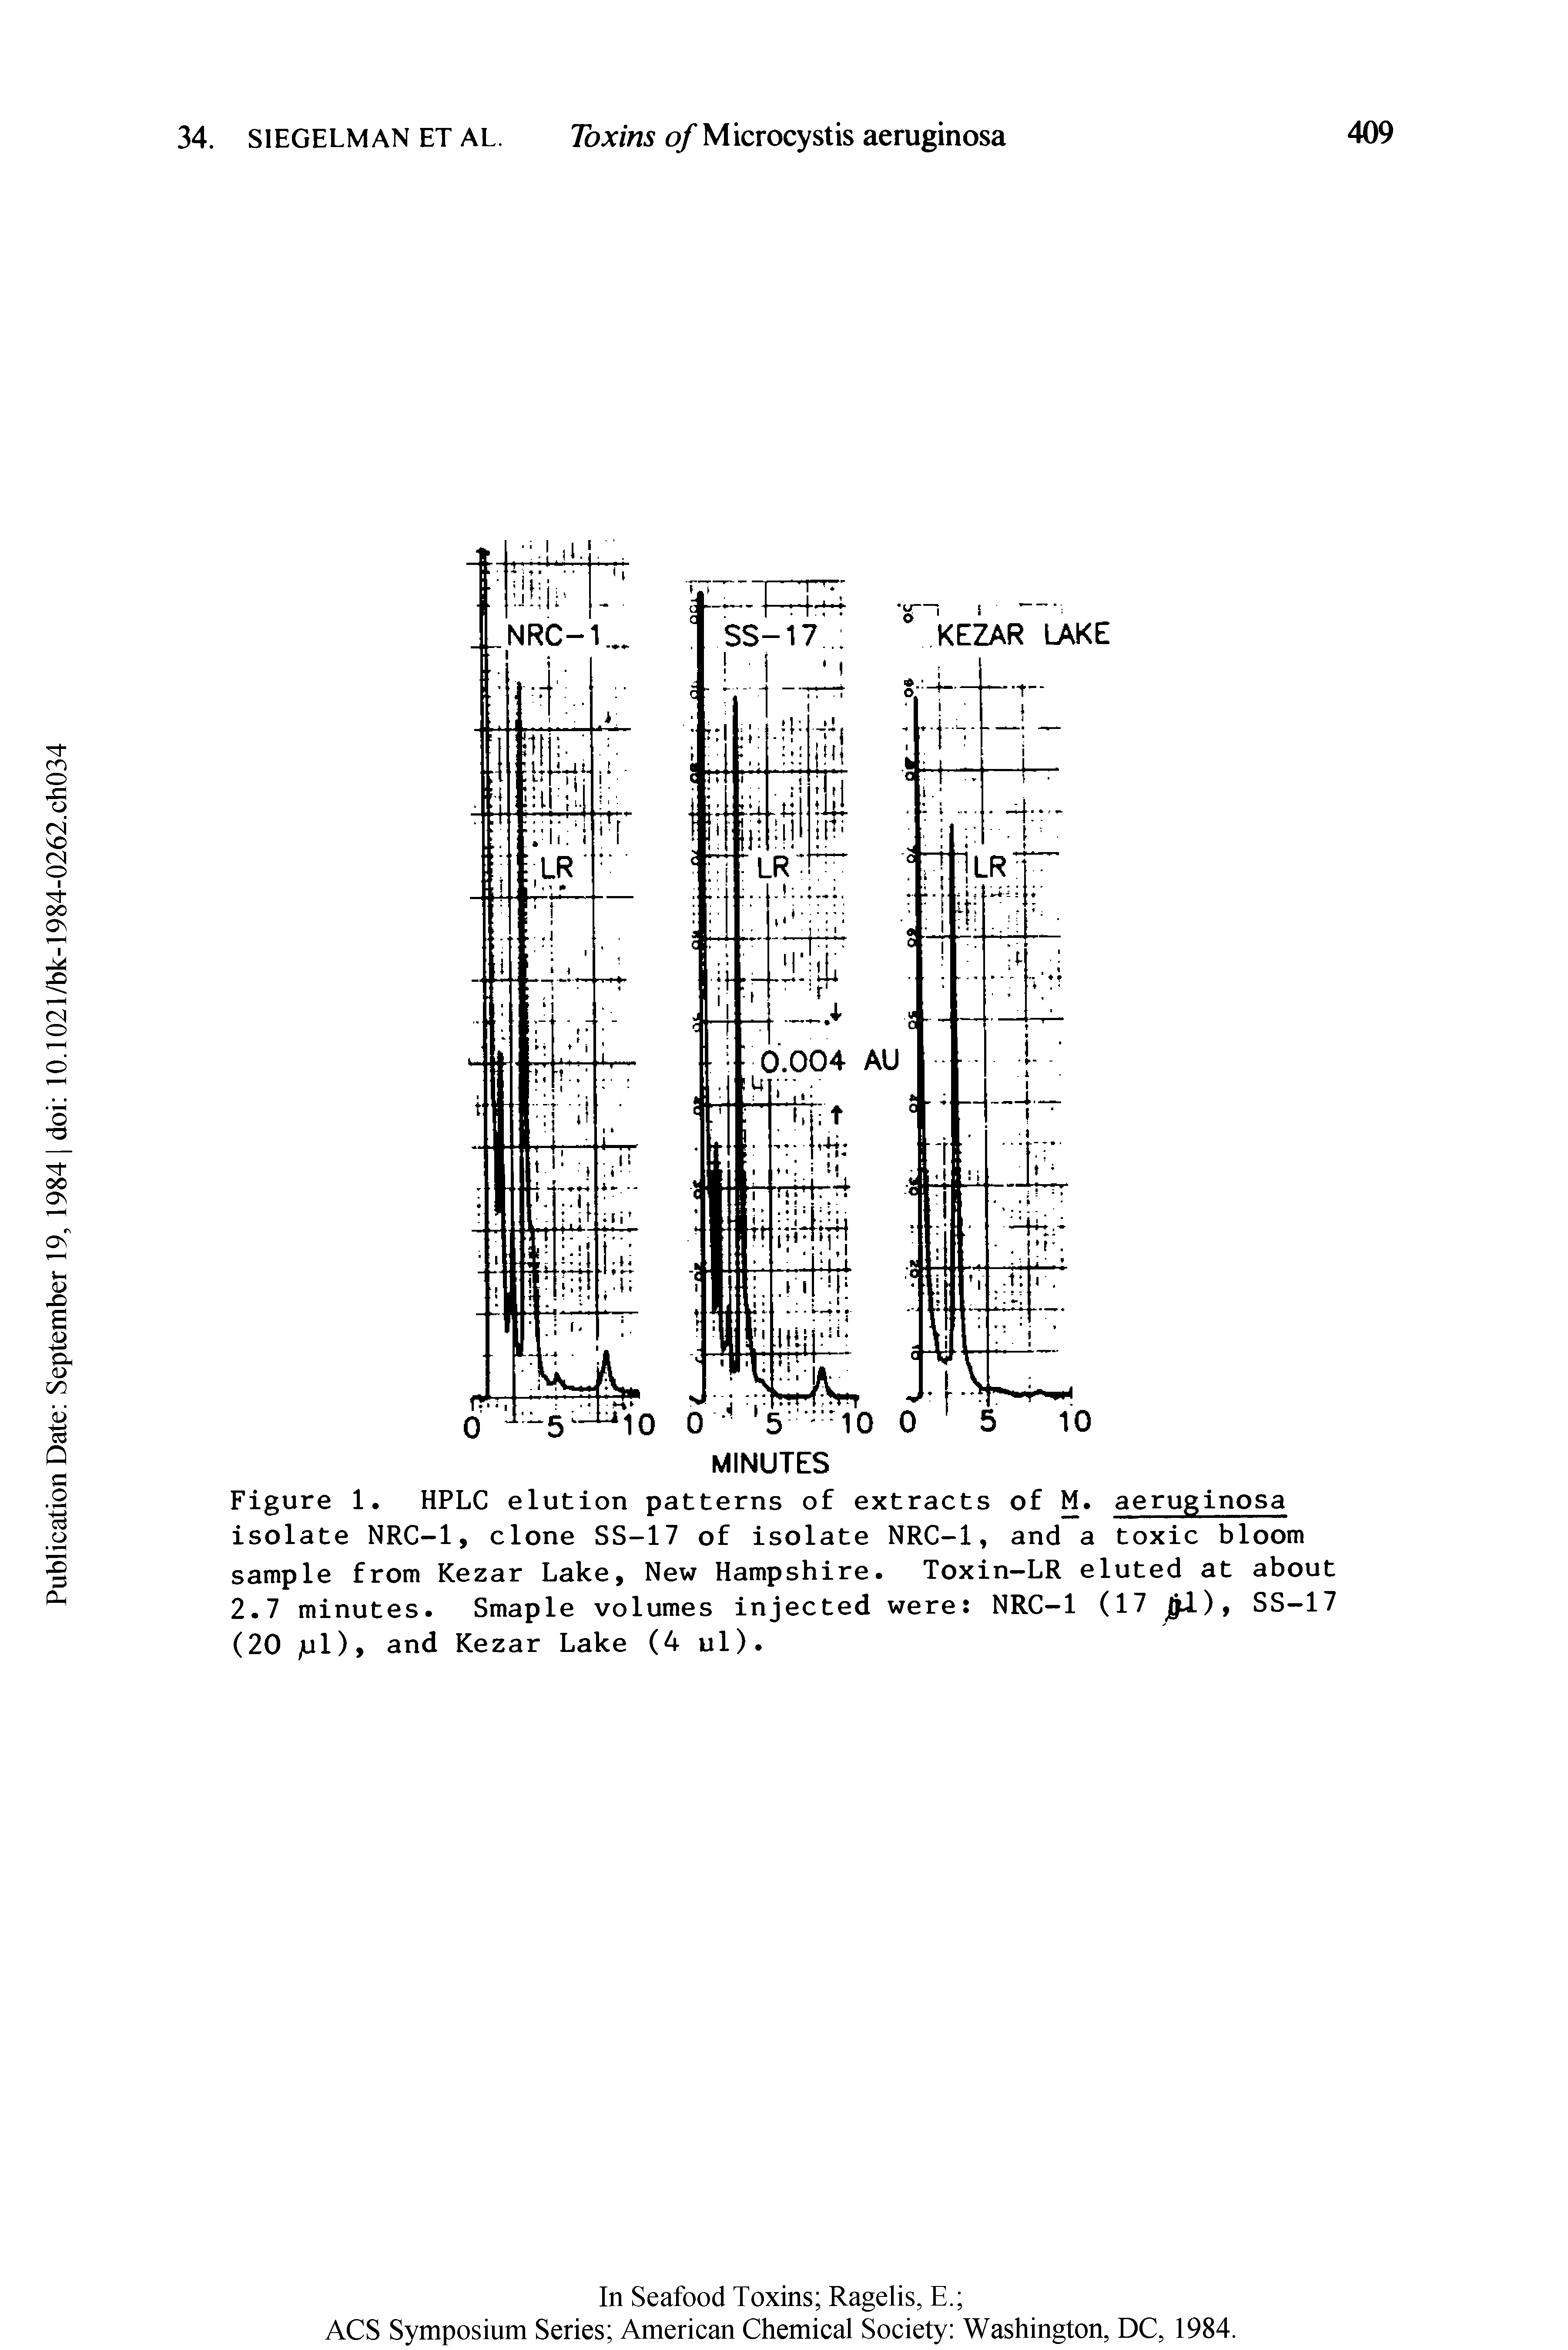 Figure 1. HPLC elution patterns of extracts of M. aeruginosa isolate NRC—1, clone SS-17 of isolate NRC-1, and a toxic bloom sample from Kezar Lake, New Hampshire. Toxin-LR eluted at about 2.7 minutes. Smaple volumes injected were NRC-1 (17 SS-17...